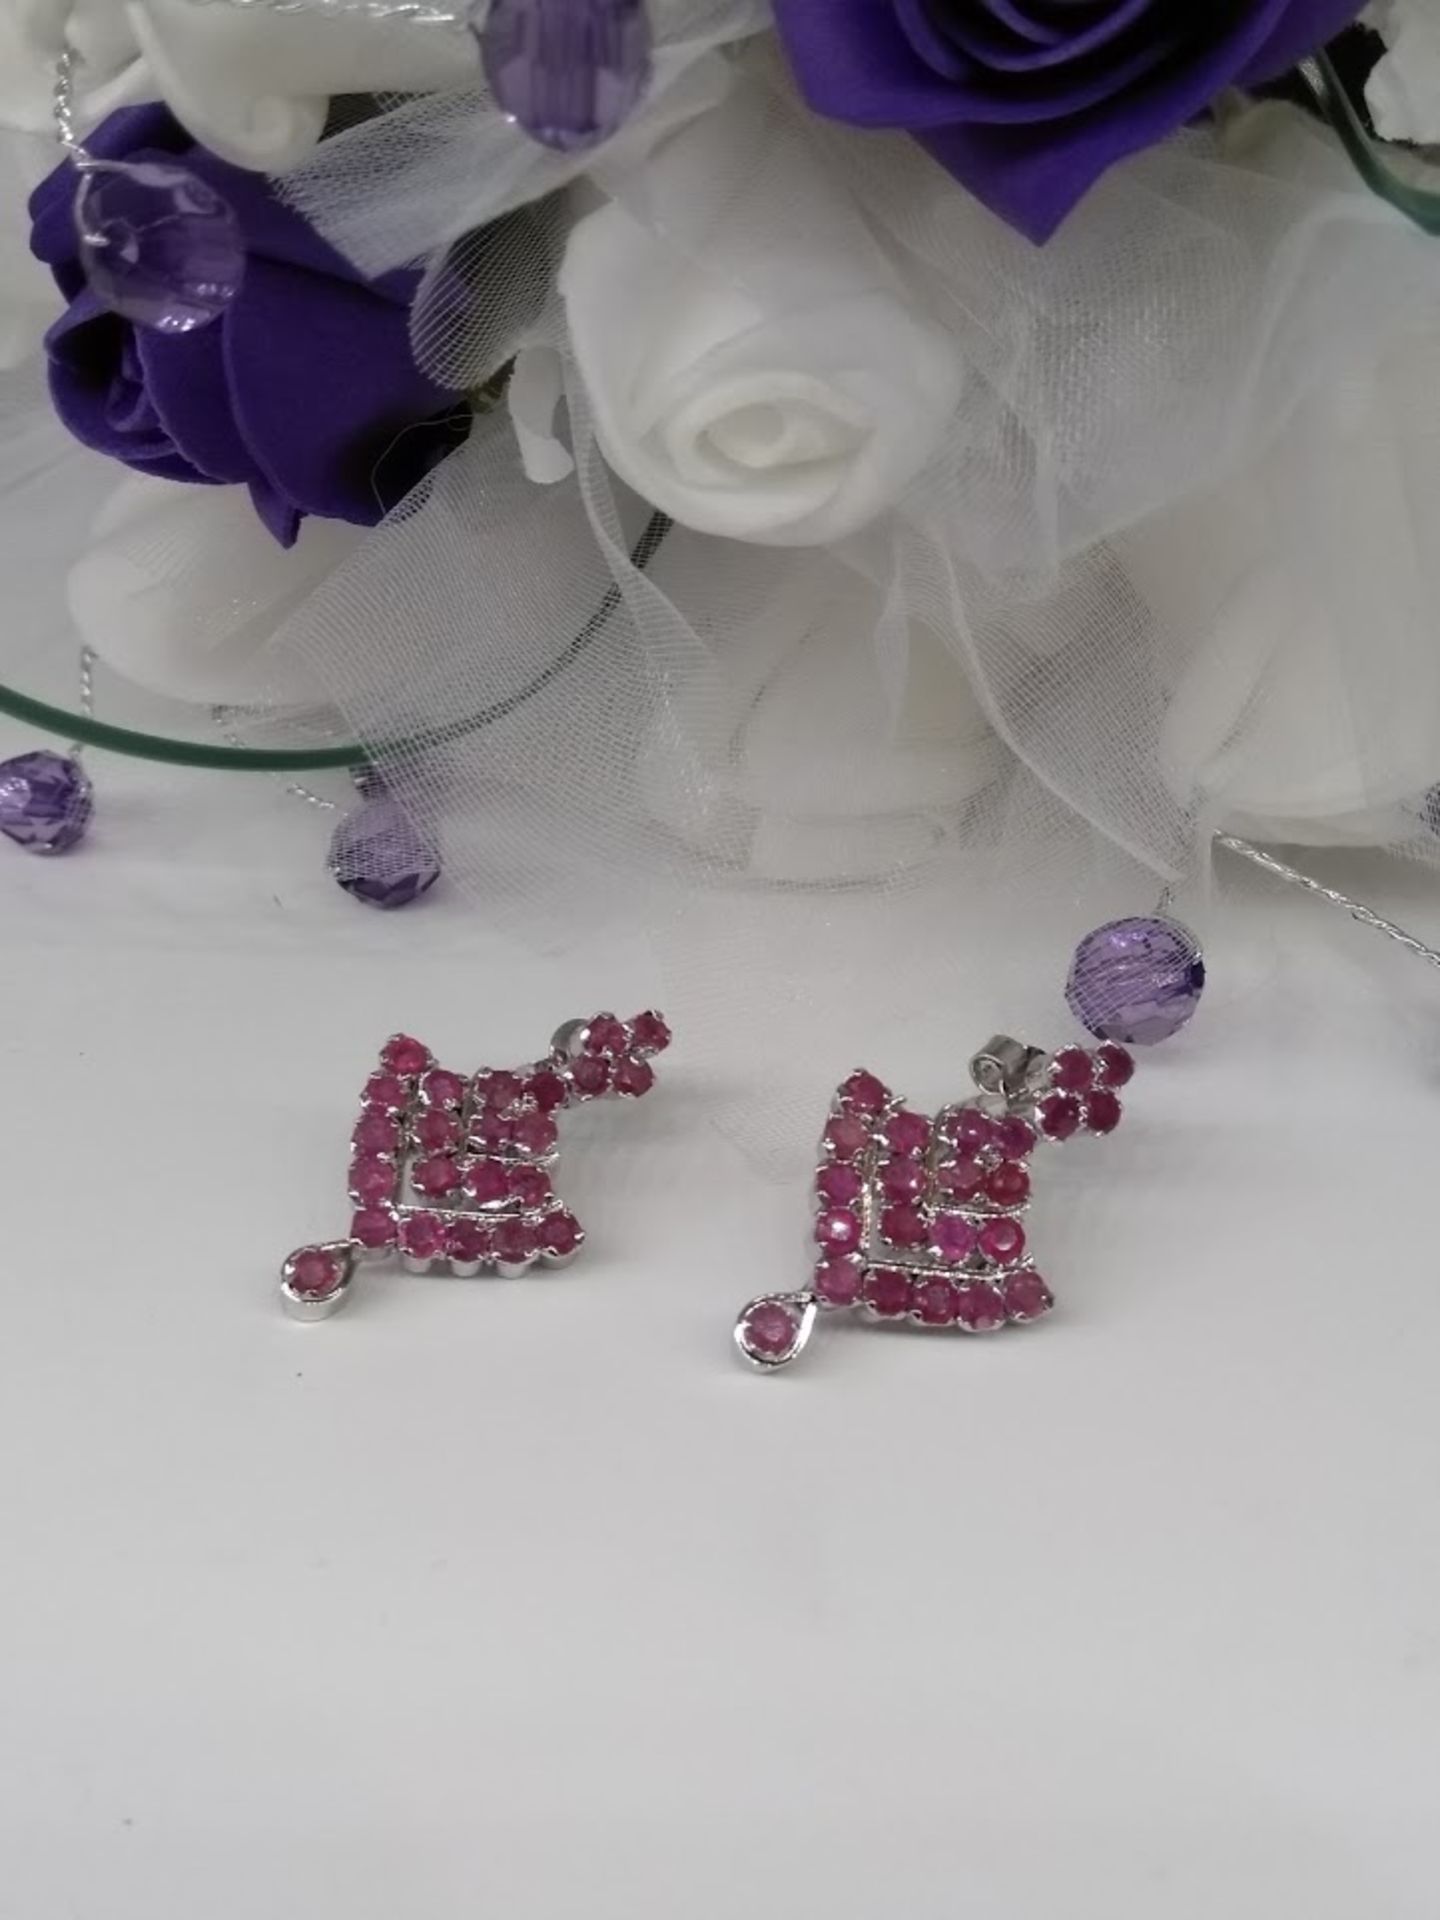 AGI Certified - Lovely pair of Natural Ruby Earrings - Set with 46 Natural Rubys.